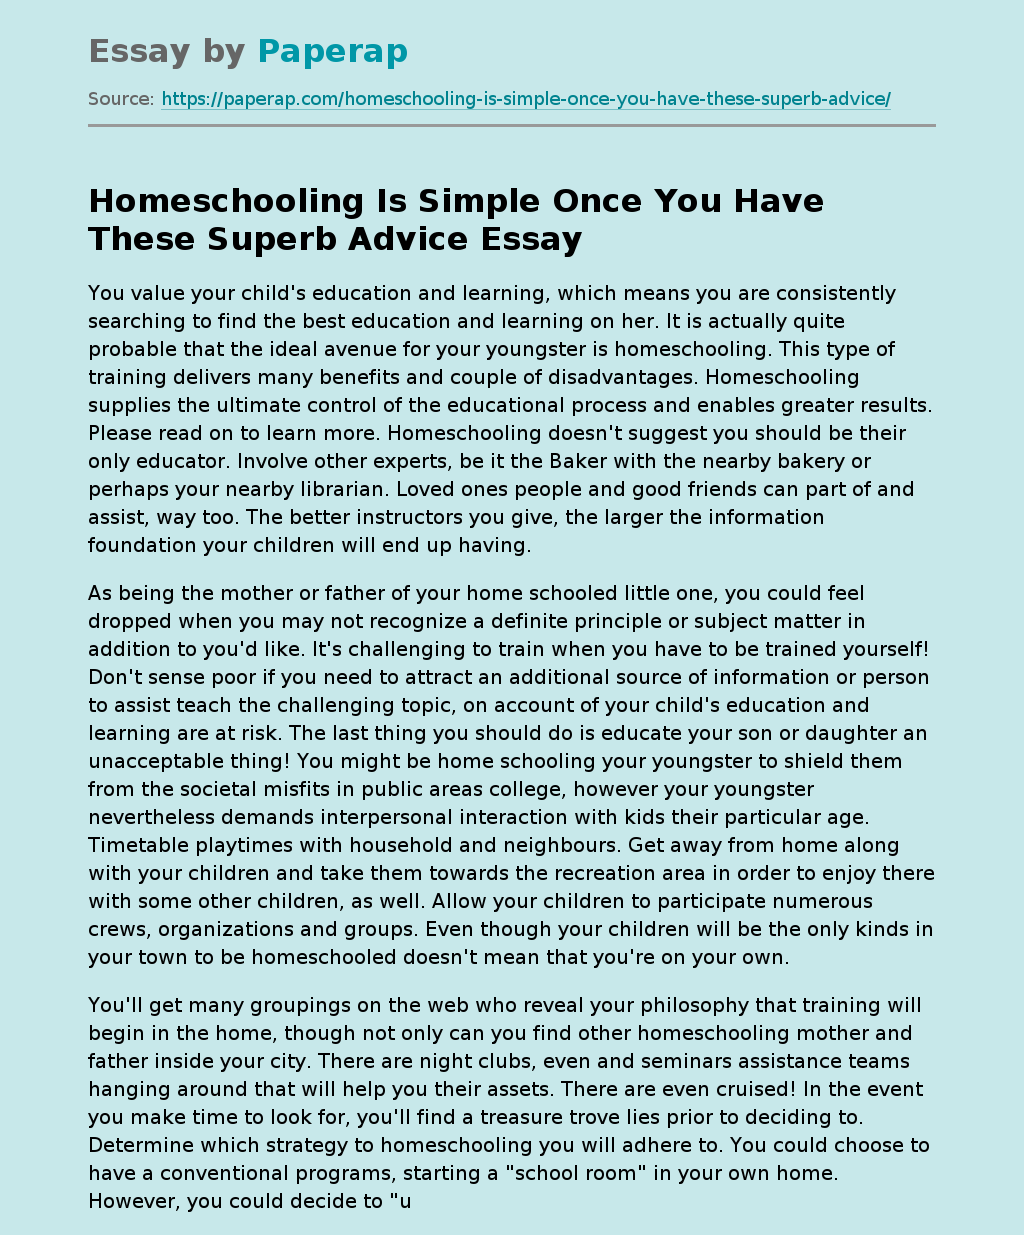 Homeschooling Is Simple Once You Have These Superb Advice